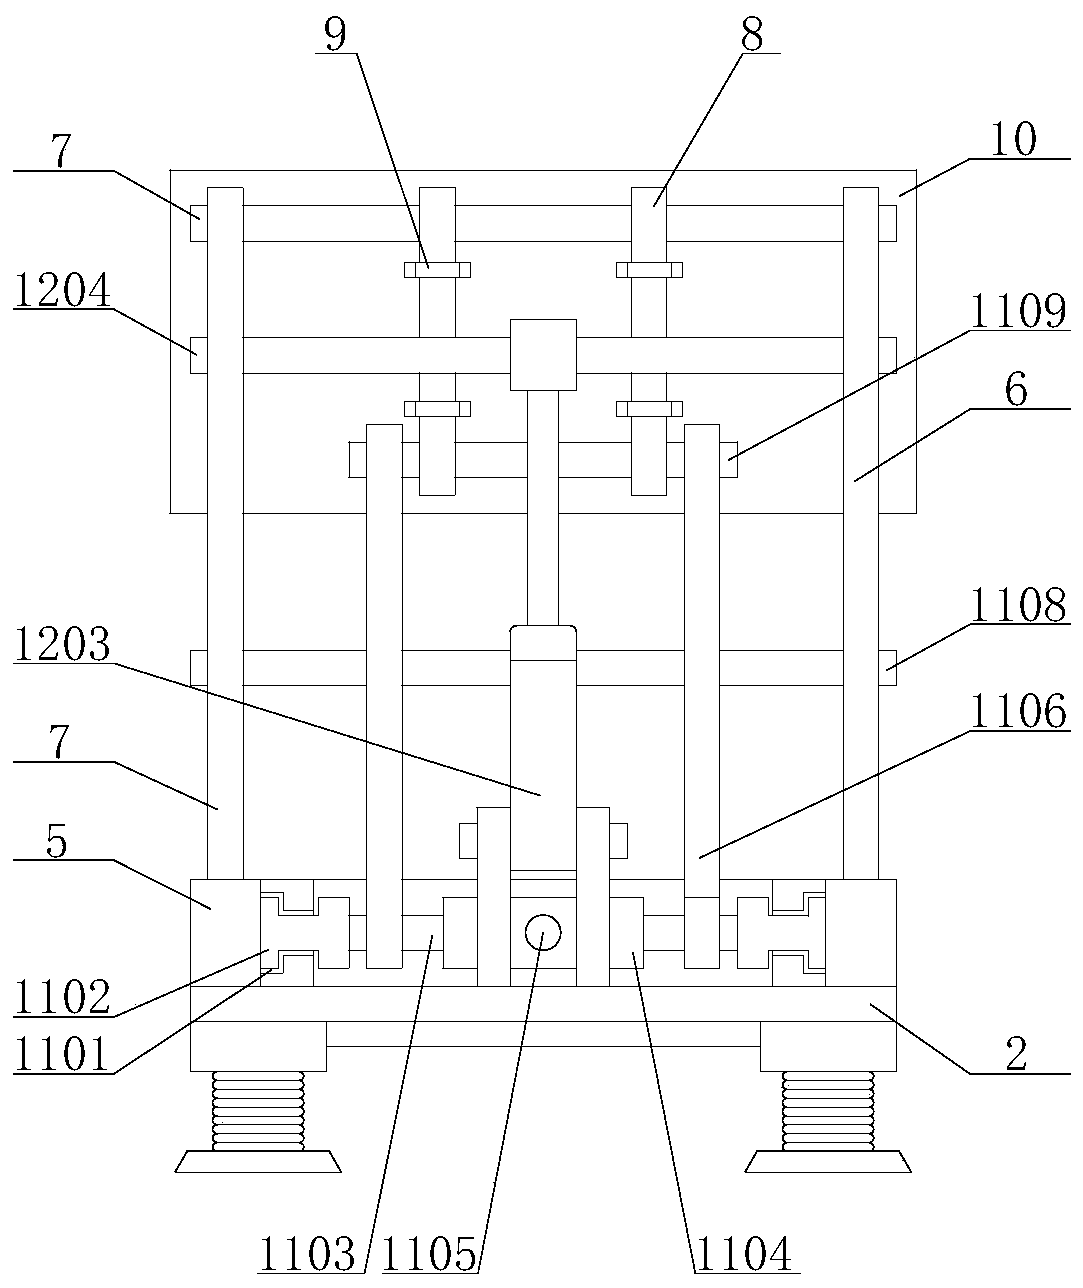 Supporting device capable of conveniently adjusting height for bridge construction